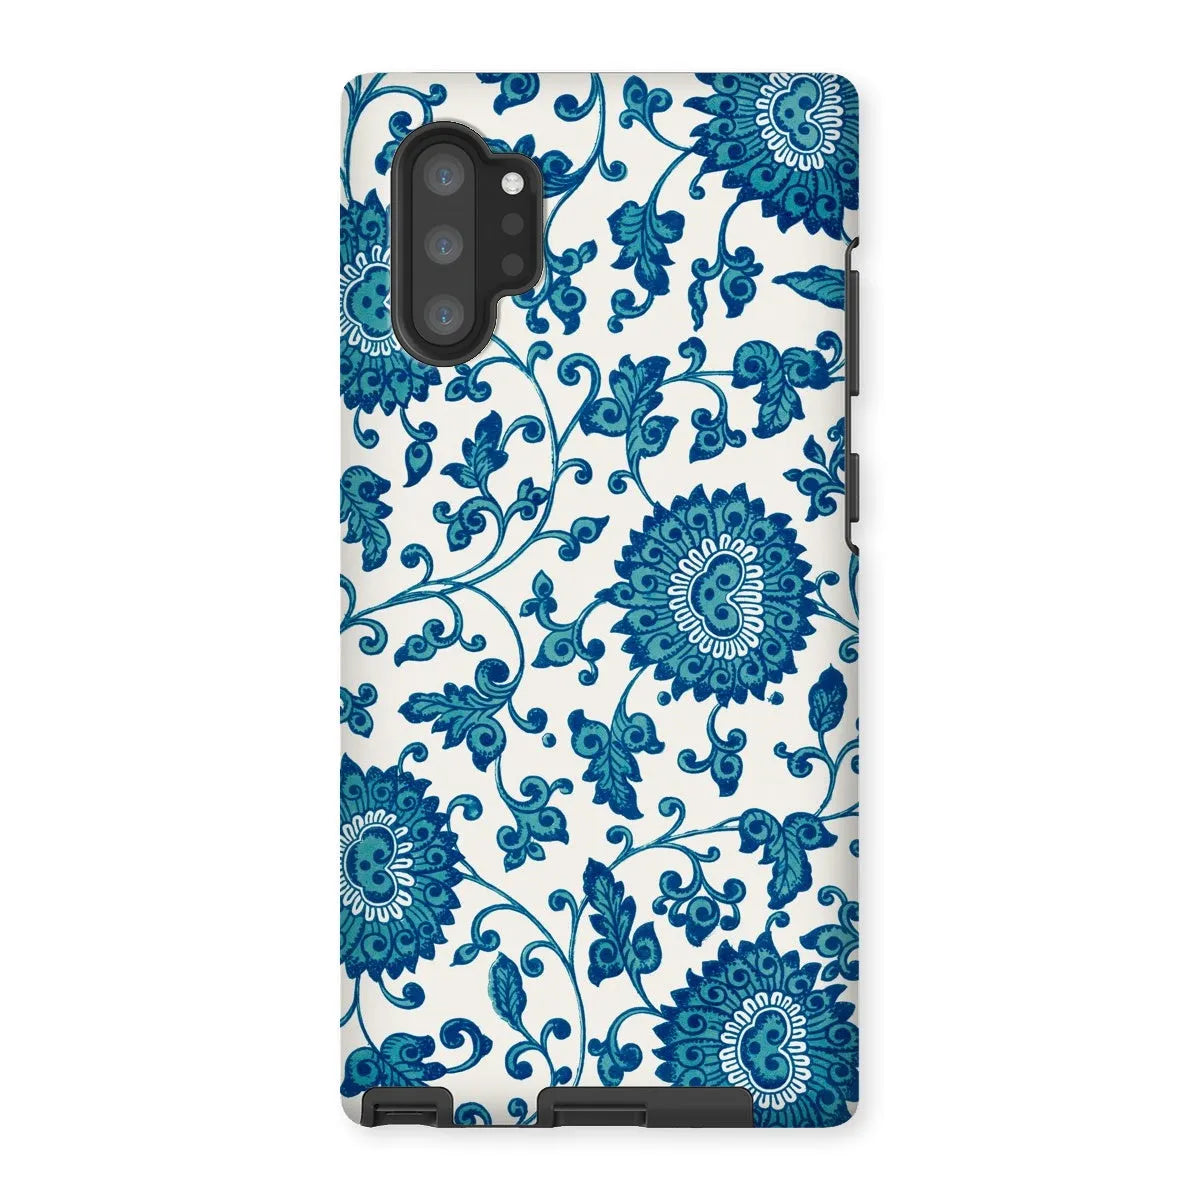 Blue And White Floral Aesthetic Art Phone Case - Owen Jones - Samsung Galaxy Note 10p / Matte - Mobile Phone Cases